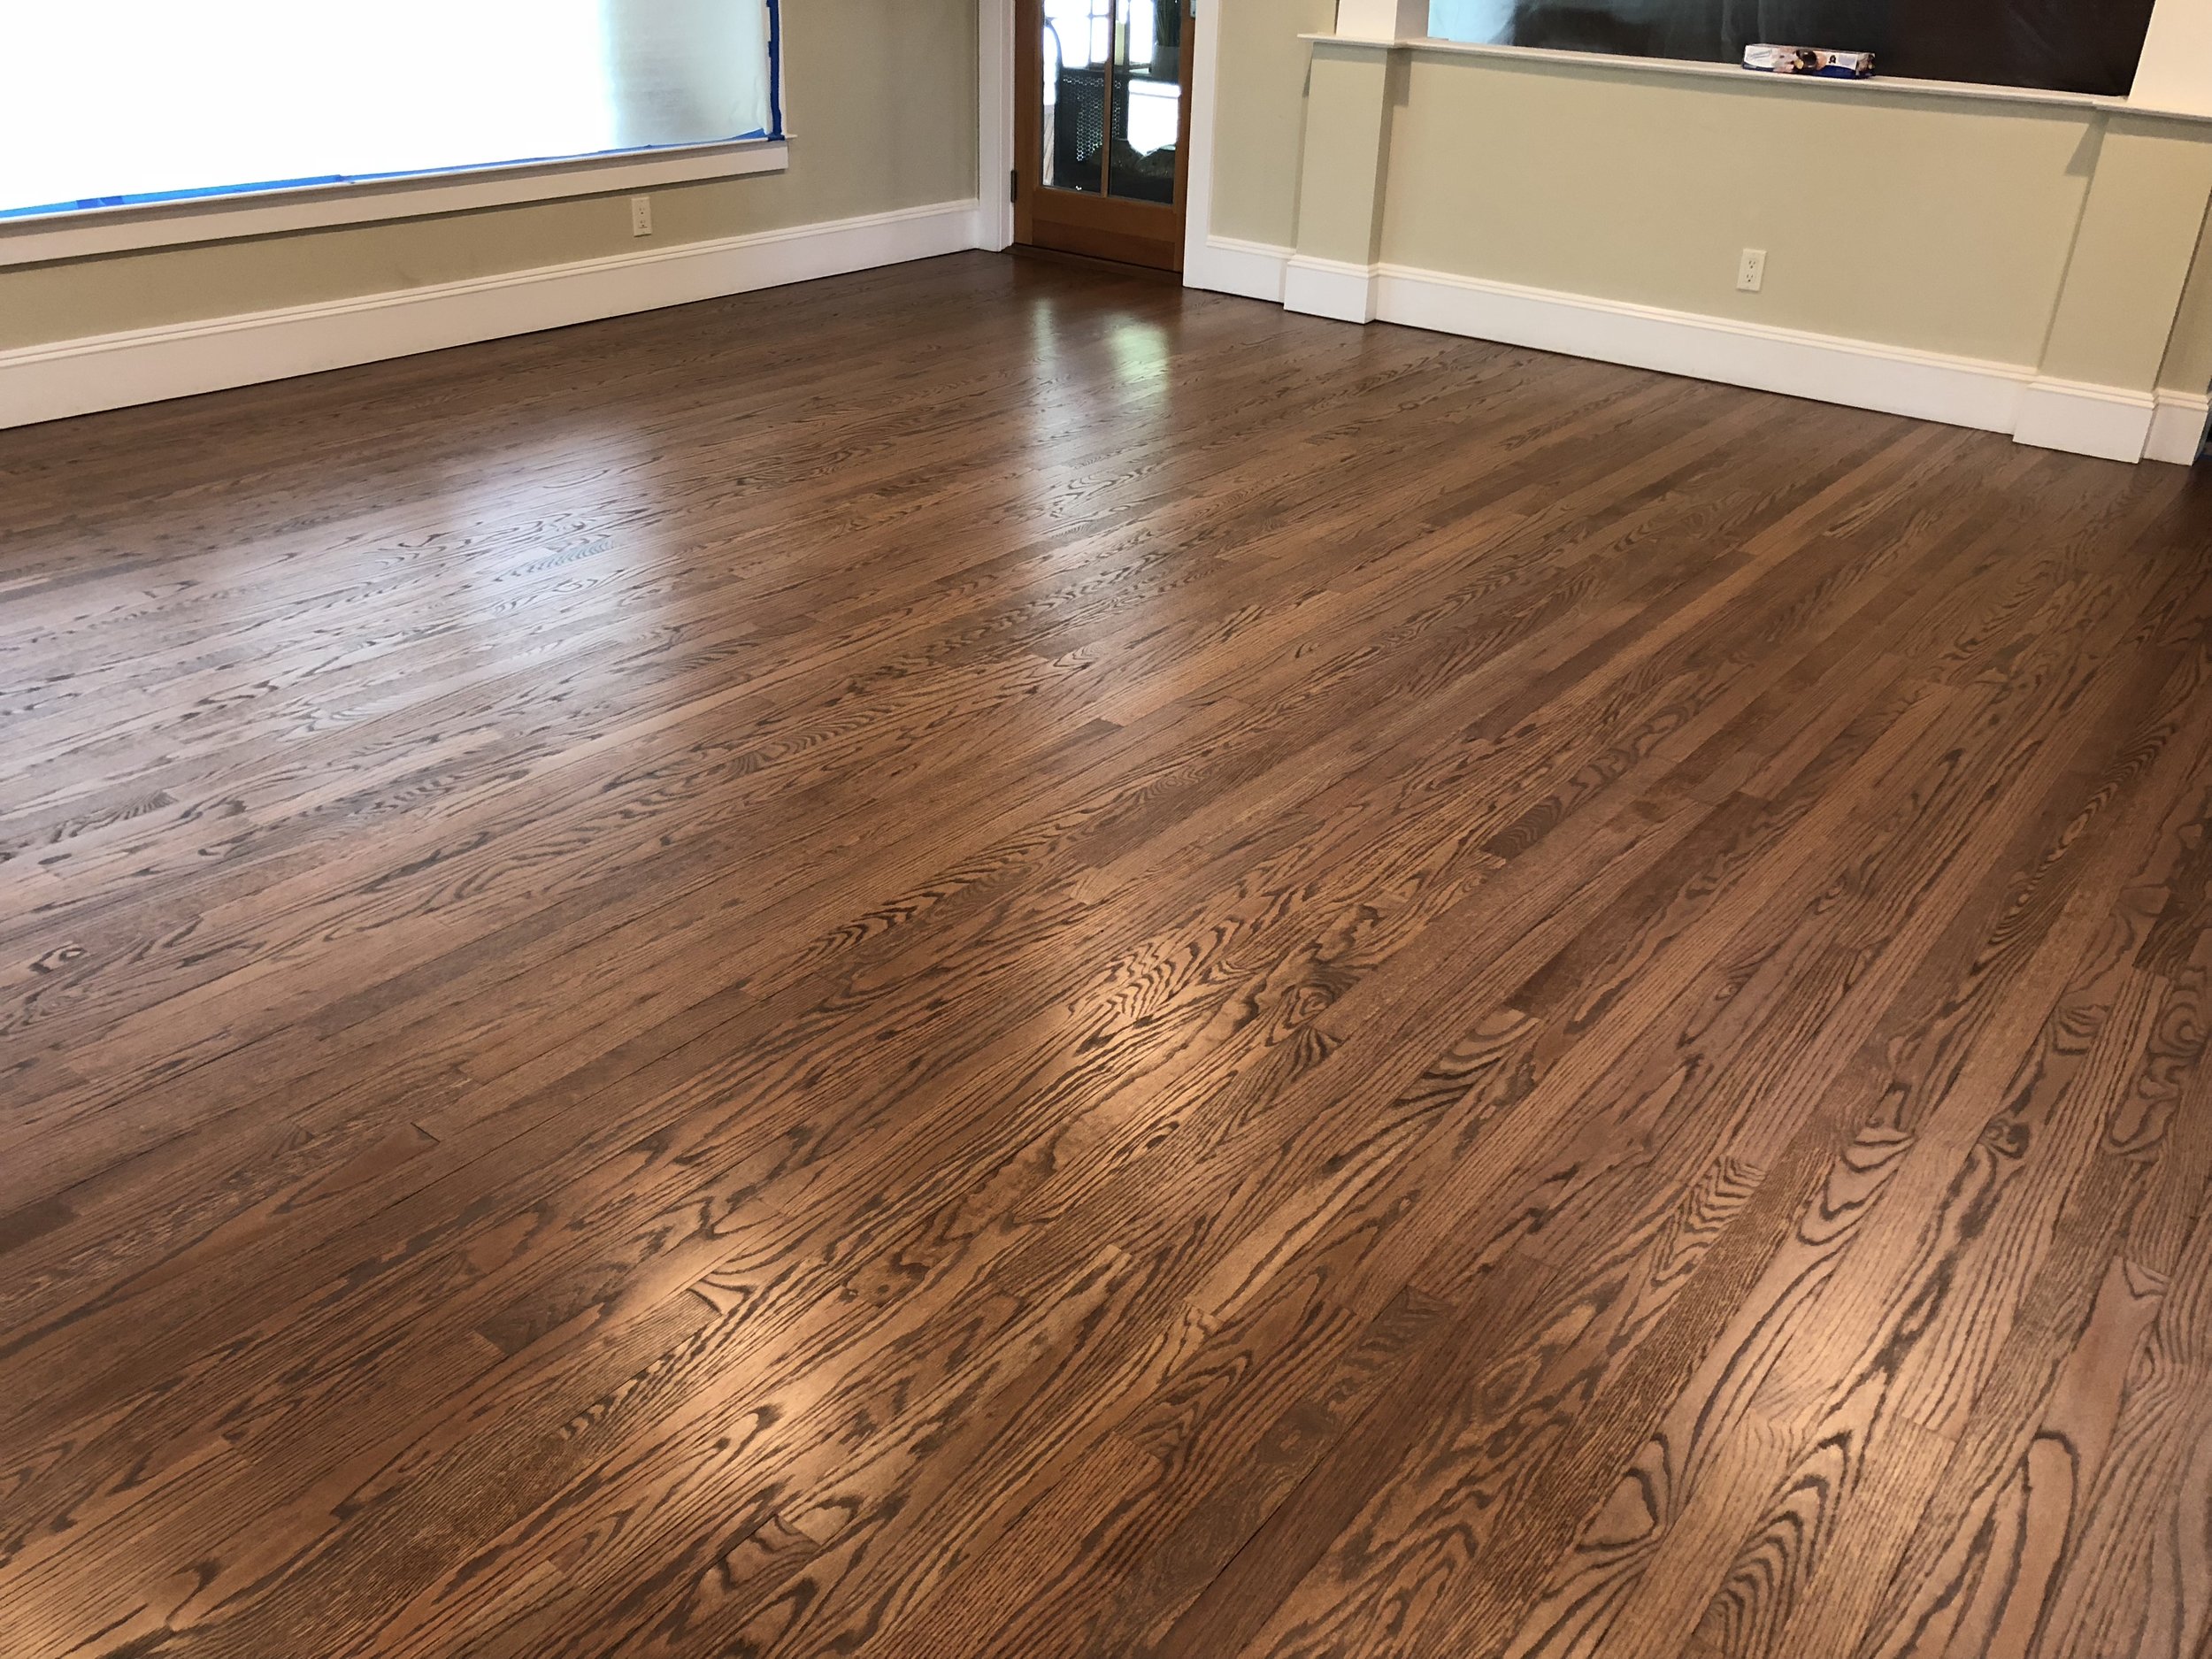 TO GRAY OR NOT TO GRAY? GRAY HARDWOOD FLOORS... A TREND OR A TRADITION? —  Valenti Flooring